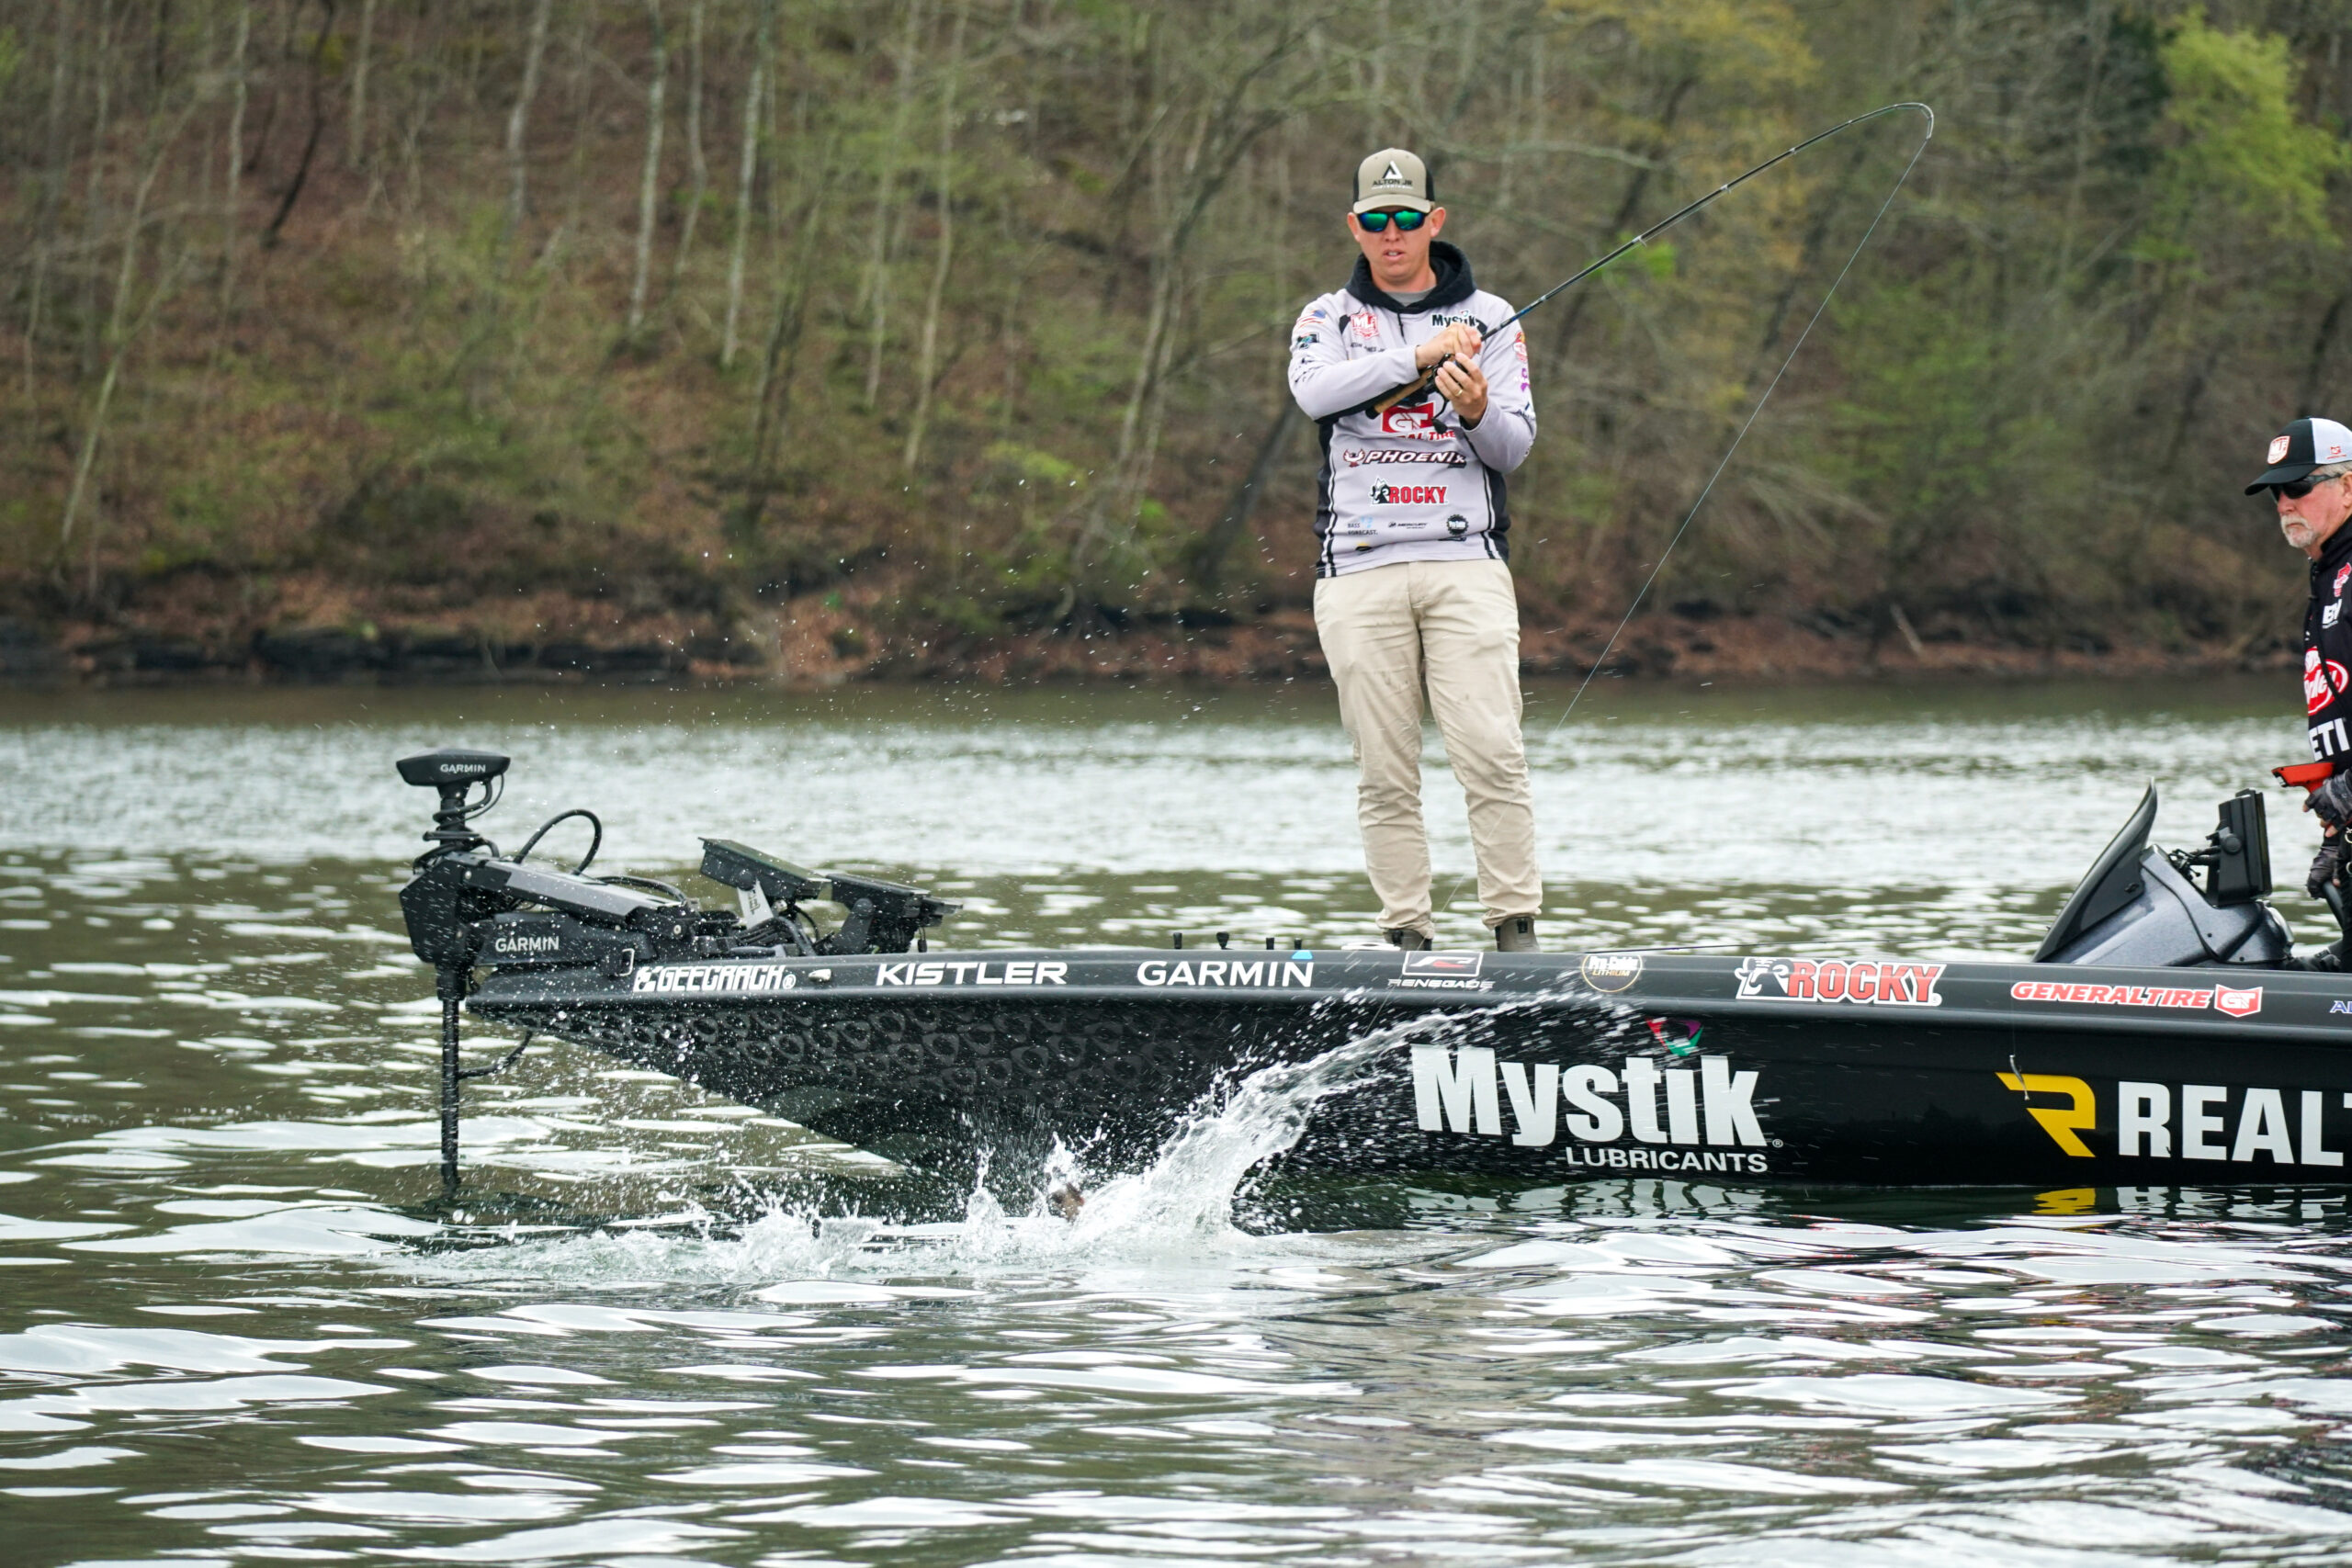 GALLERY: Dale Hollow continues to deliver - Major League Fishing